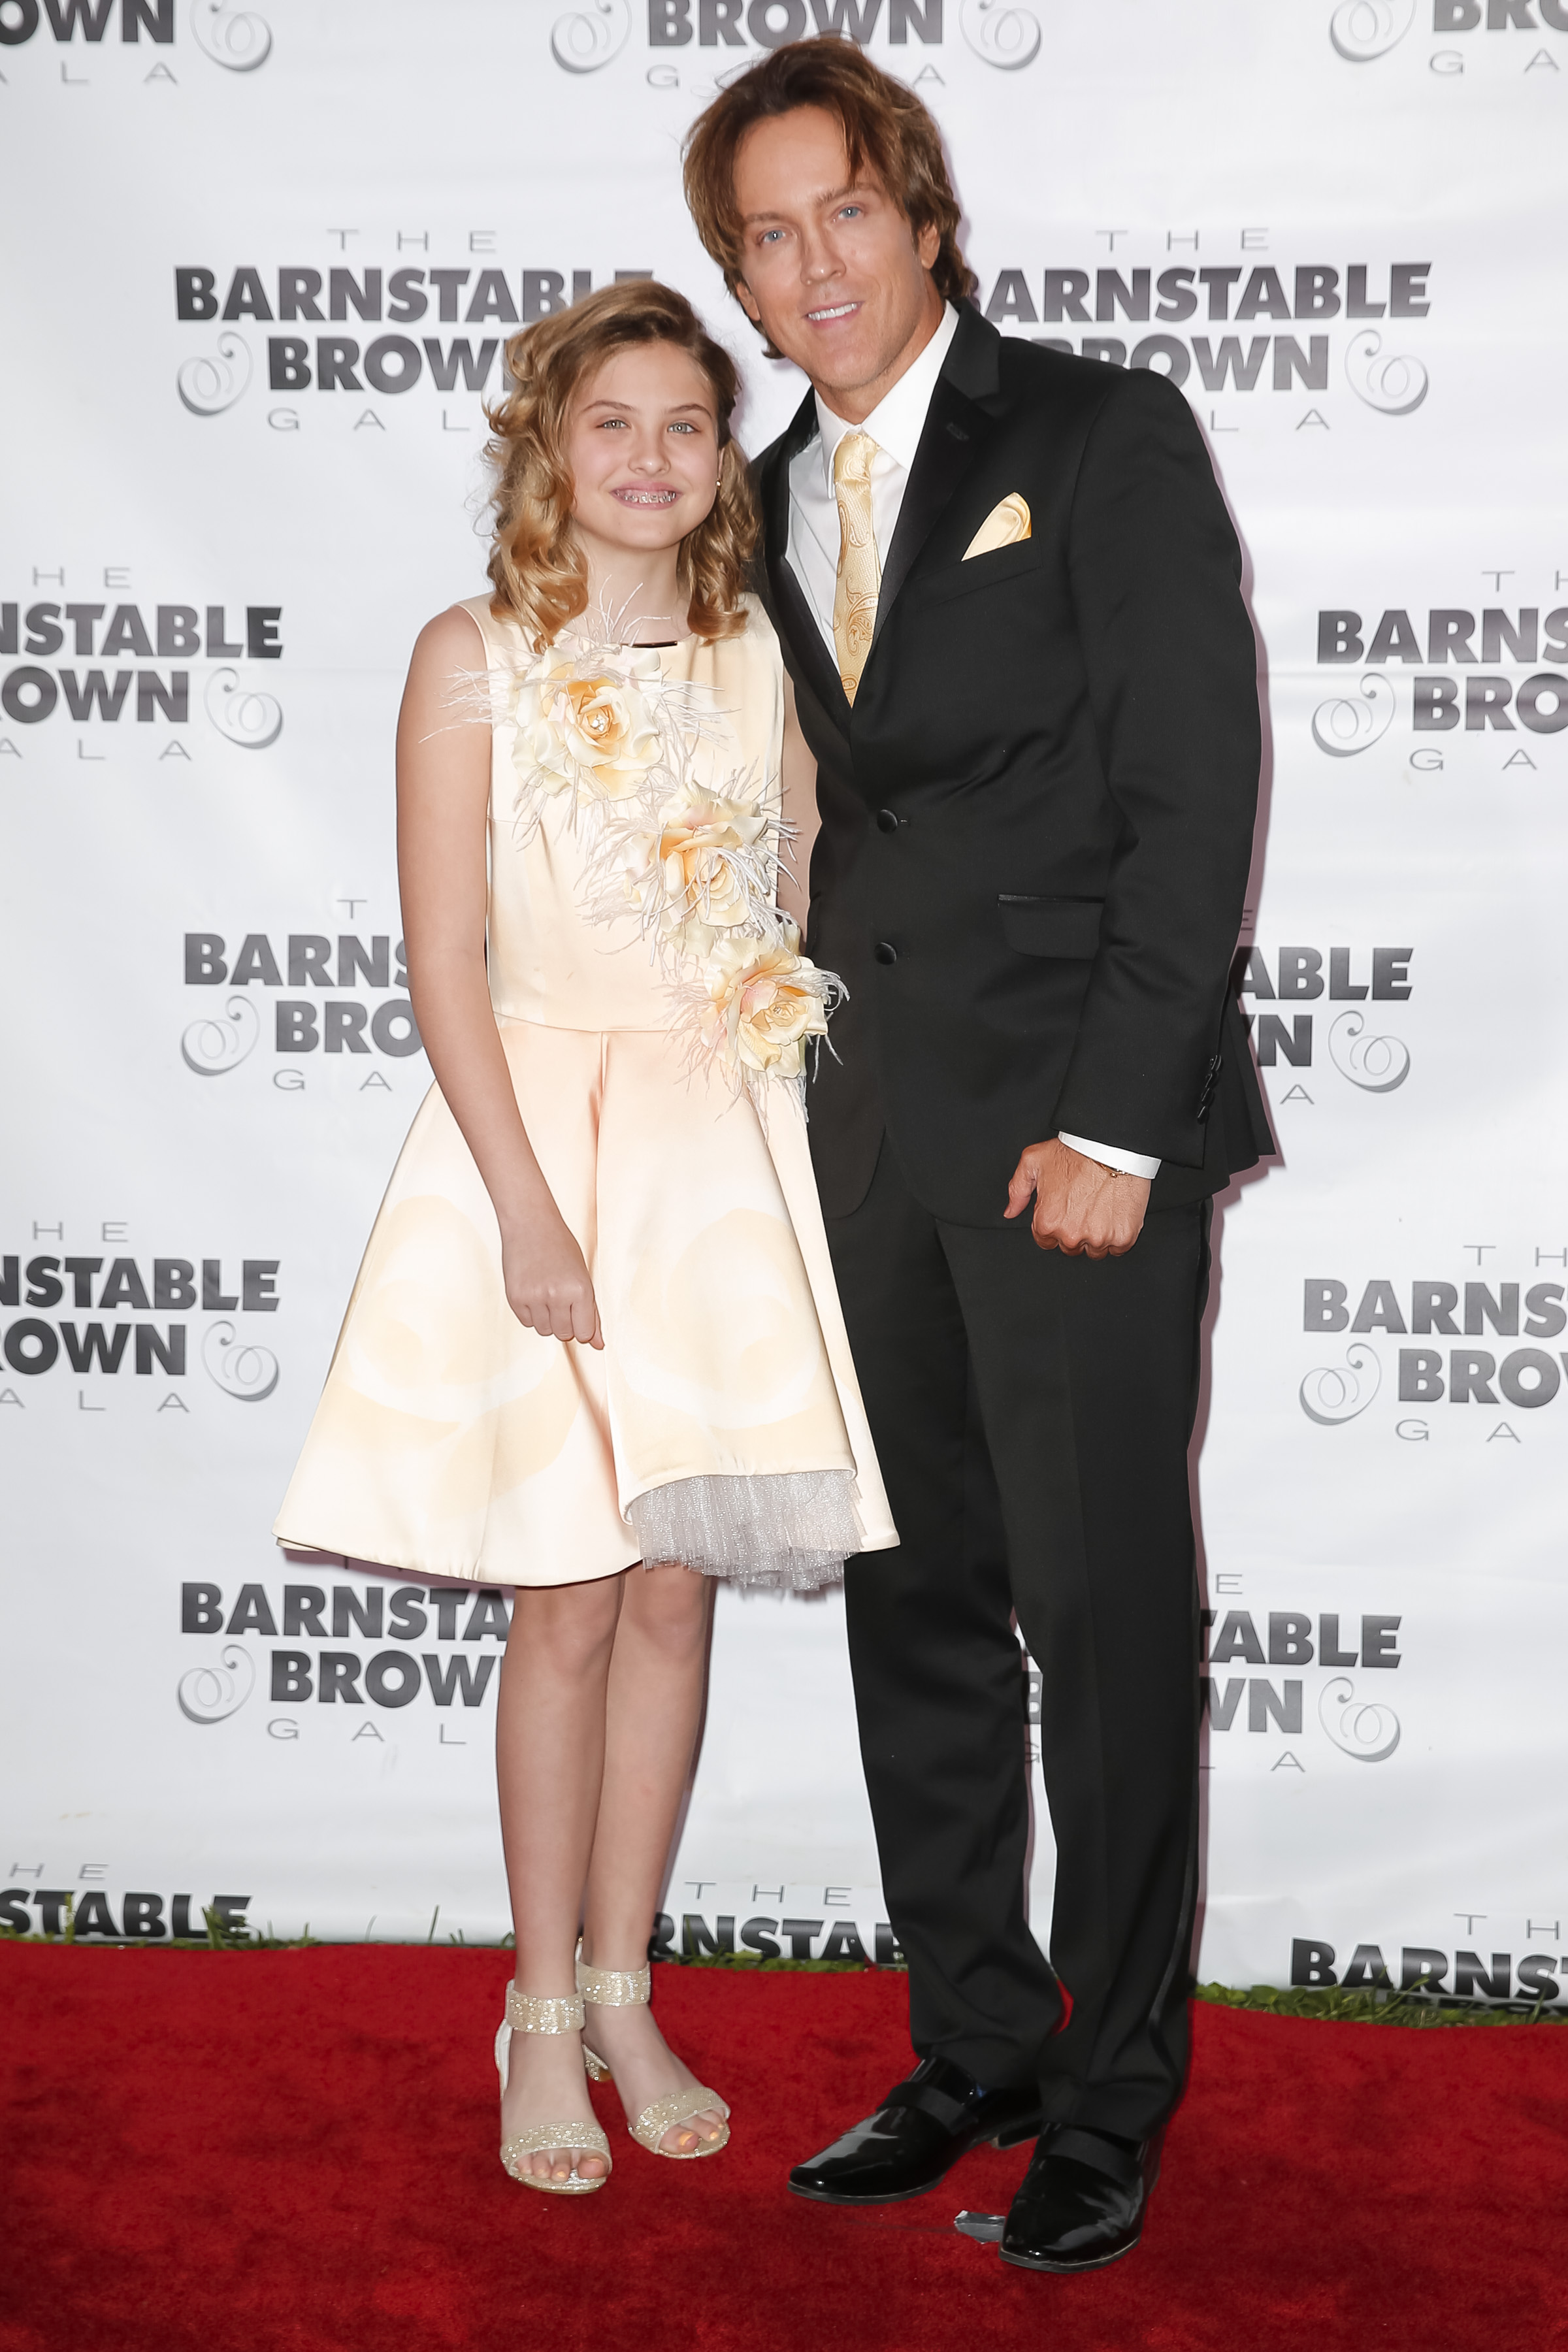 Larry Birthed and daughter Dannielynn at the Barnstable Brown Gala on May 4, 2018 | Source: Getty Images